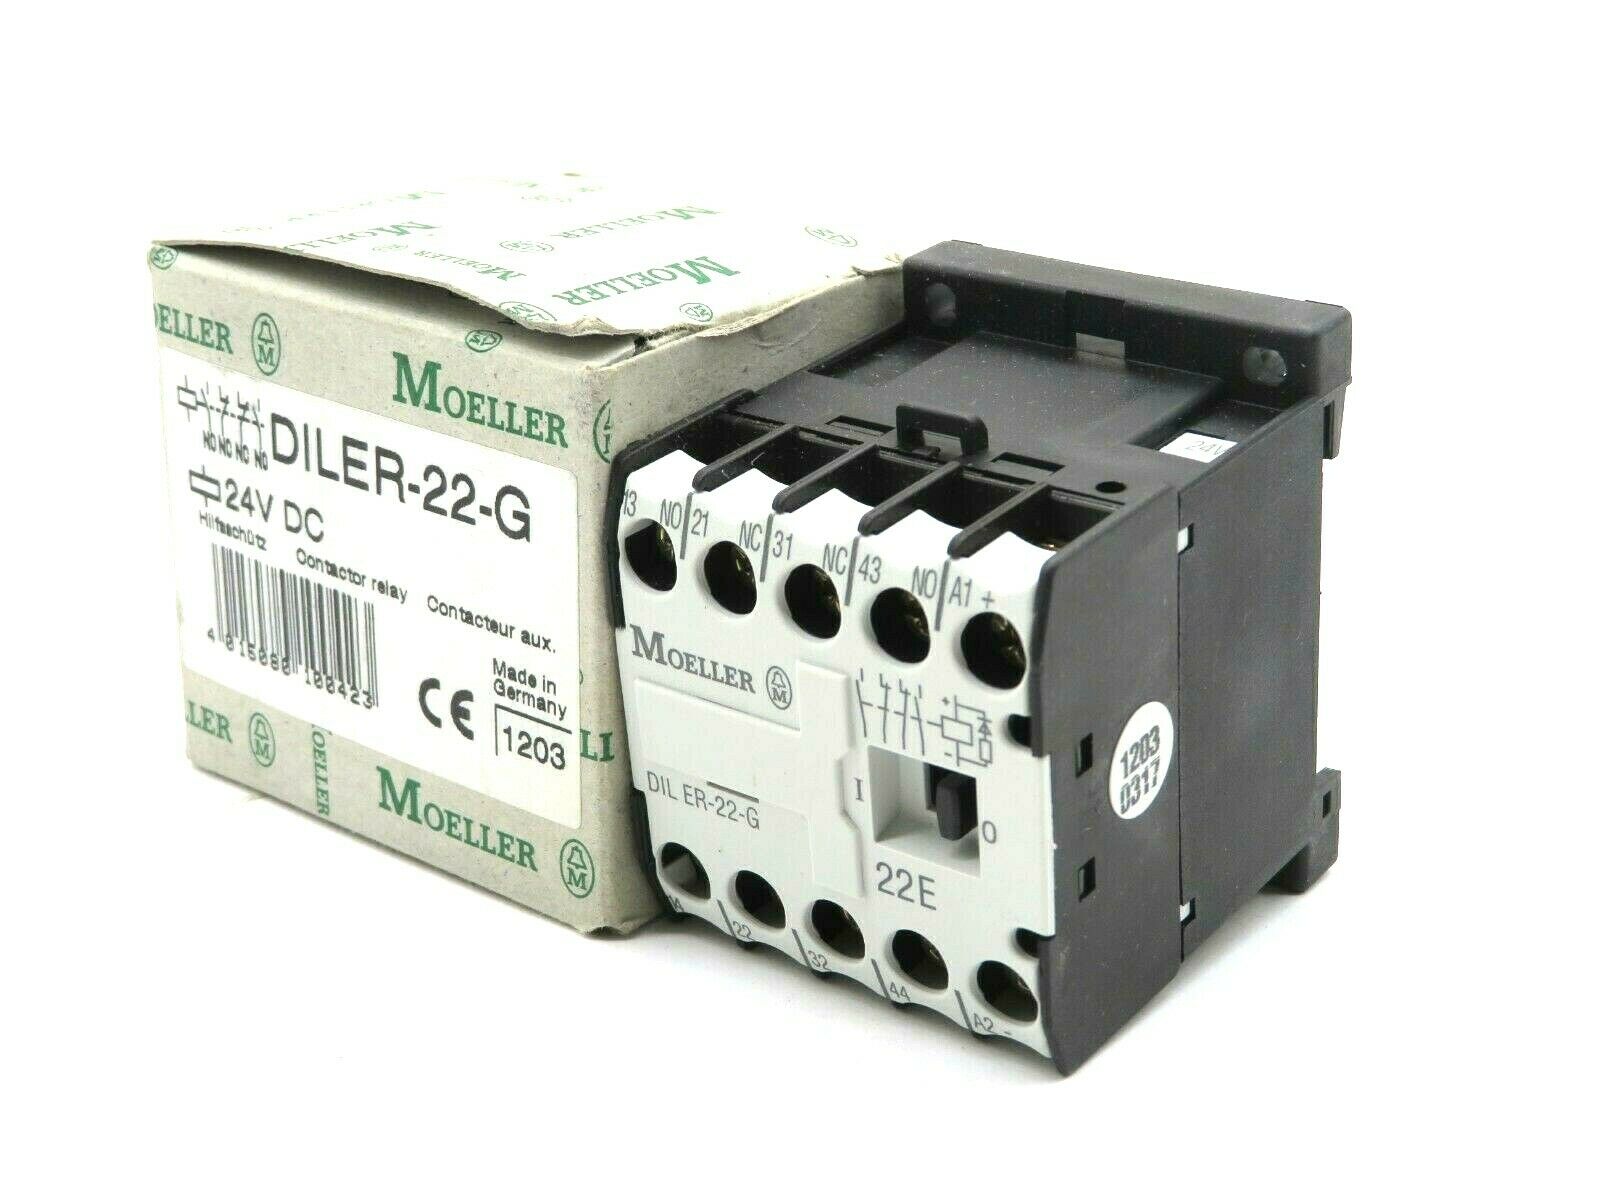 Moeller contactor relay DIL ER-22-G Auxiliary Contactor Relay Contactor 24V DC 6A 22E 